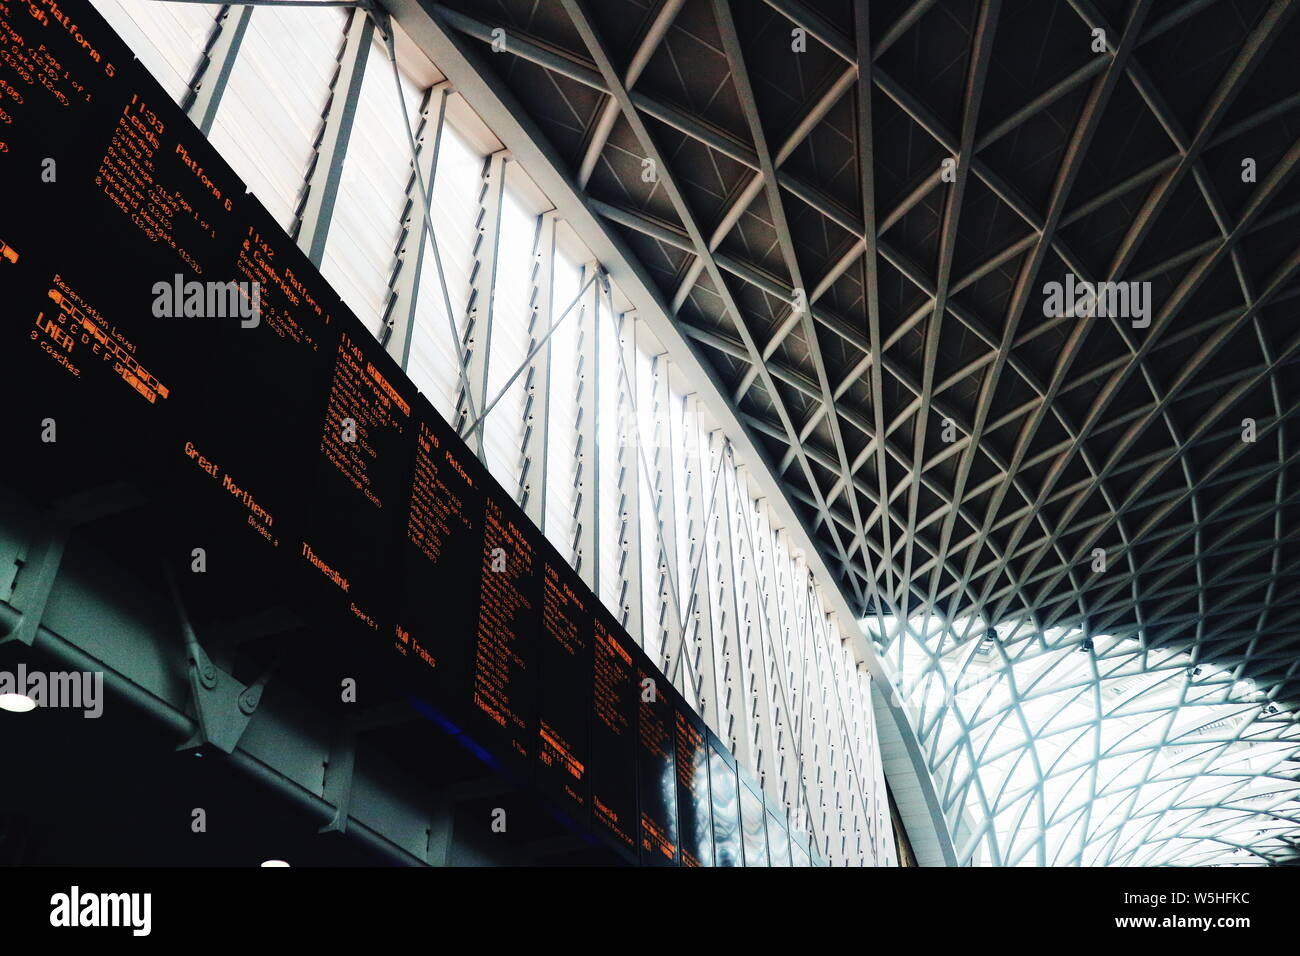 A train departure timetable under the roof of Charing Cross Station in London, UK. Stock Photo